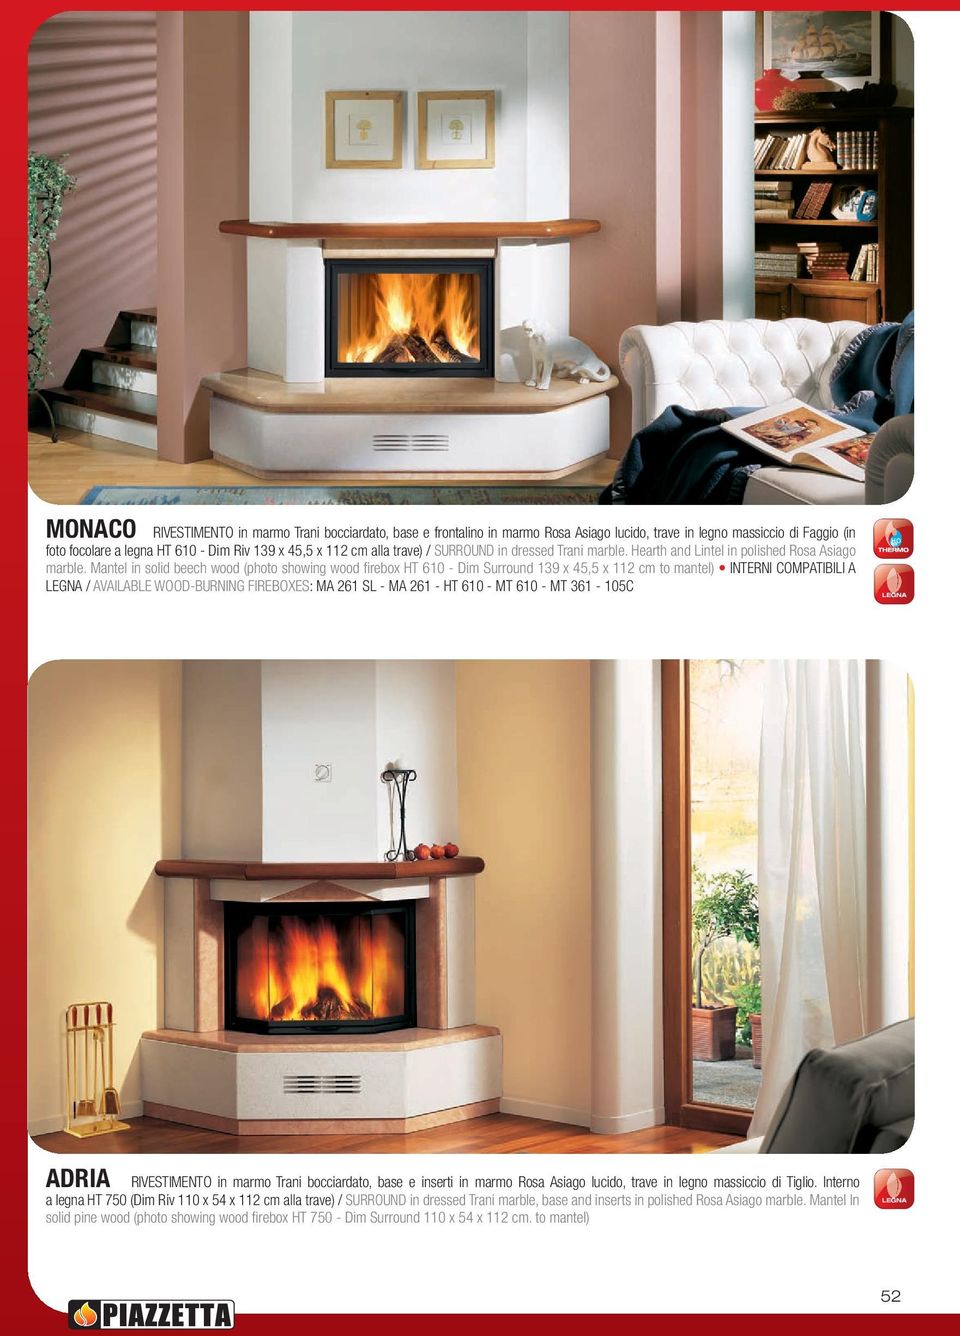 mantel in solid beech wood (photo showing wood firebox HT 610 - Dim surround 139 x 45,5 x 112 cm to mantel) INTERNI COmPaTIBILI a LEGNa / available WOOD-BURNING fireboxes: ma 261 sl - ma 261 - HT 610